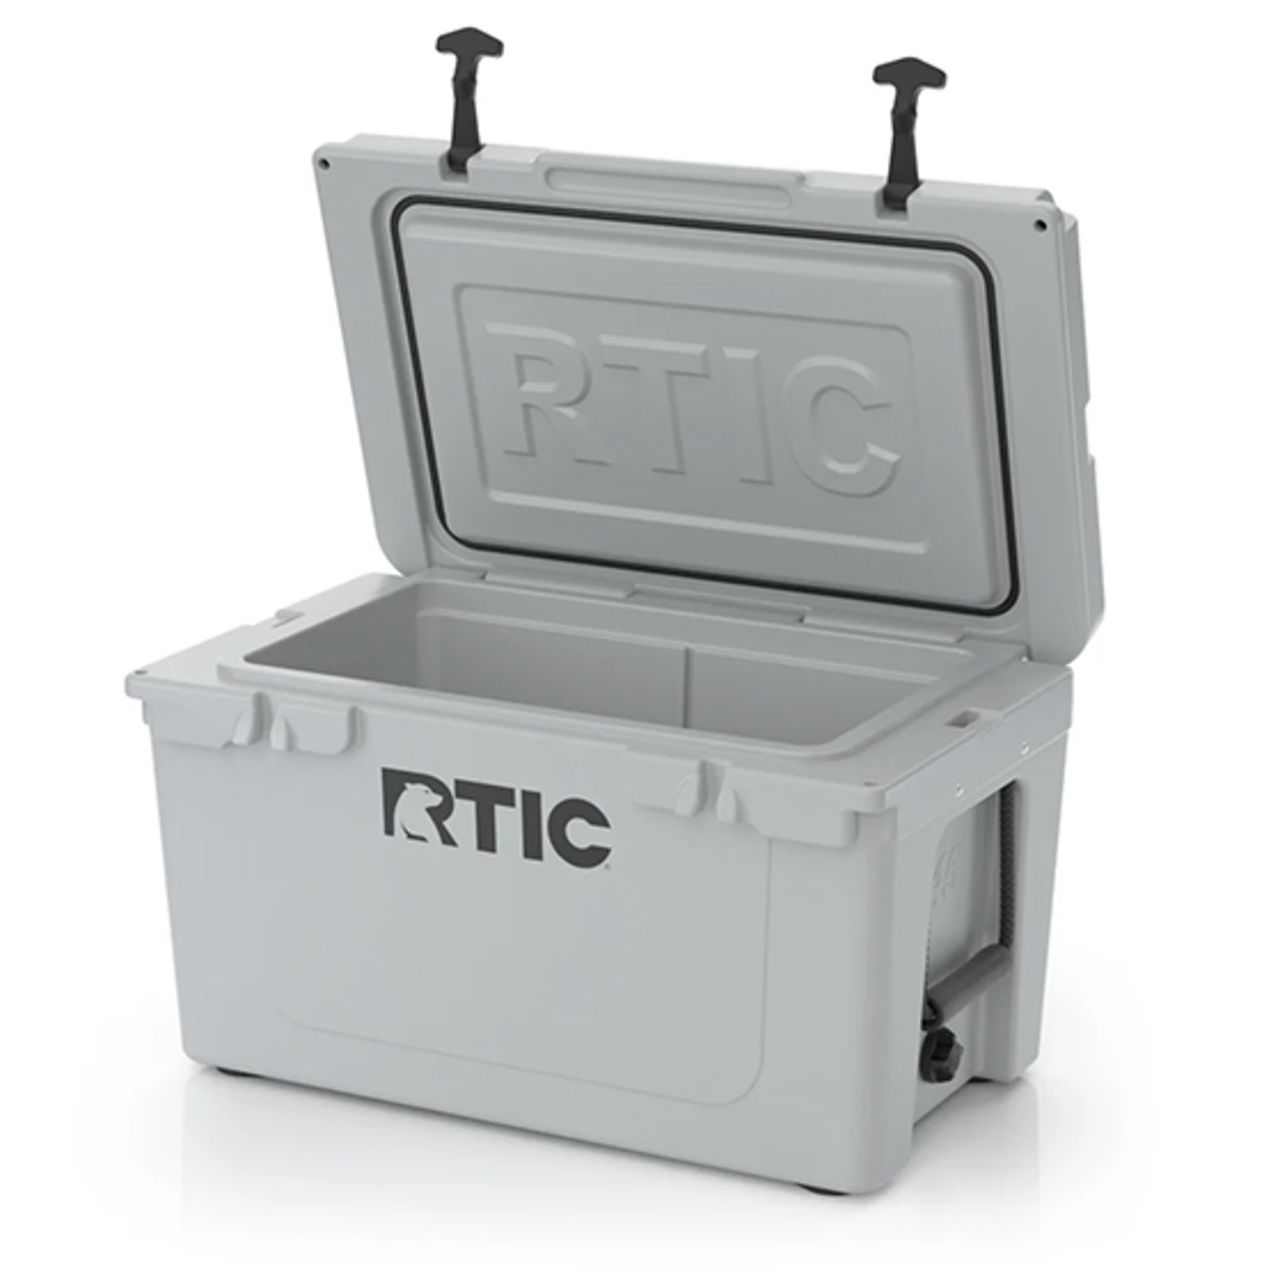 RTIC 45 -REALISTIC COOLER REVIEW 